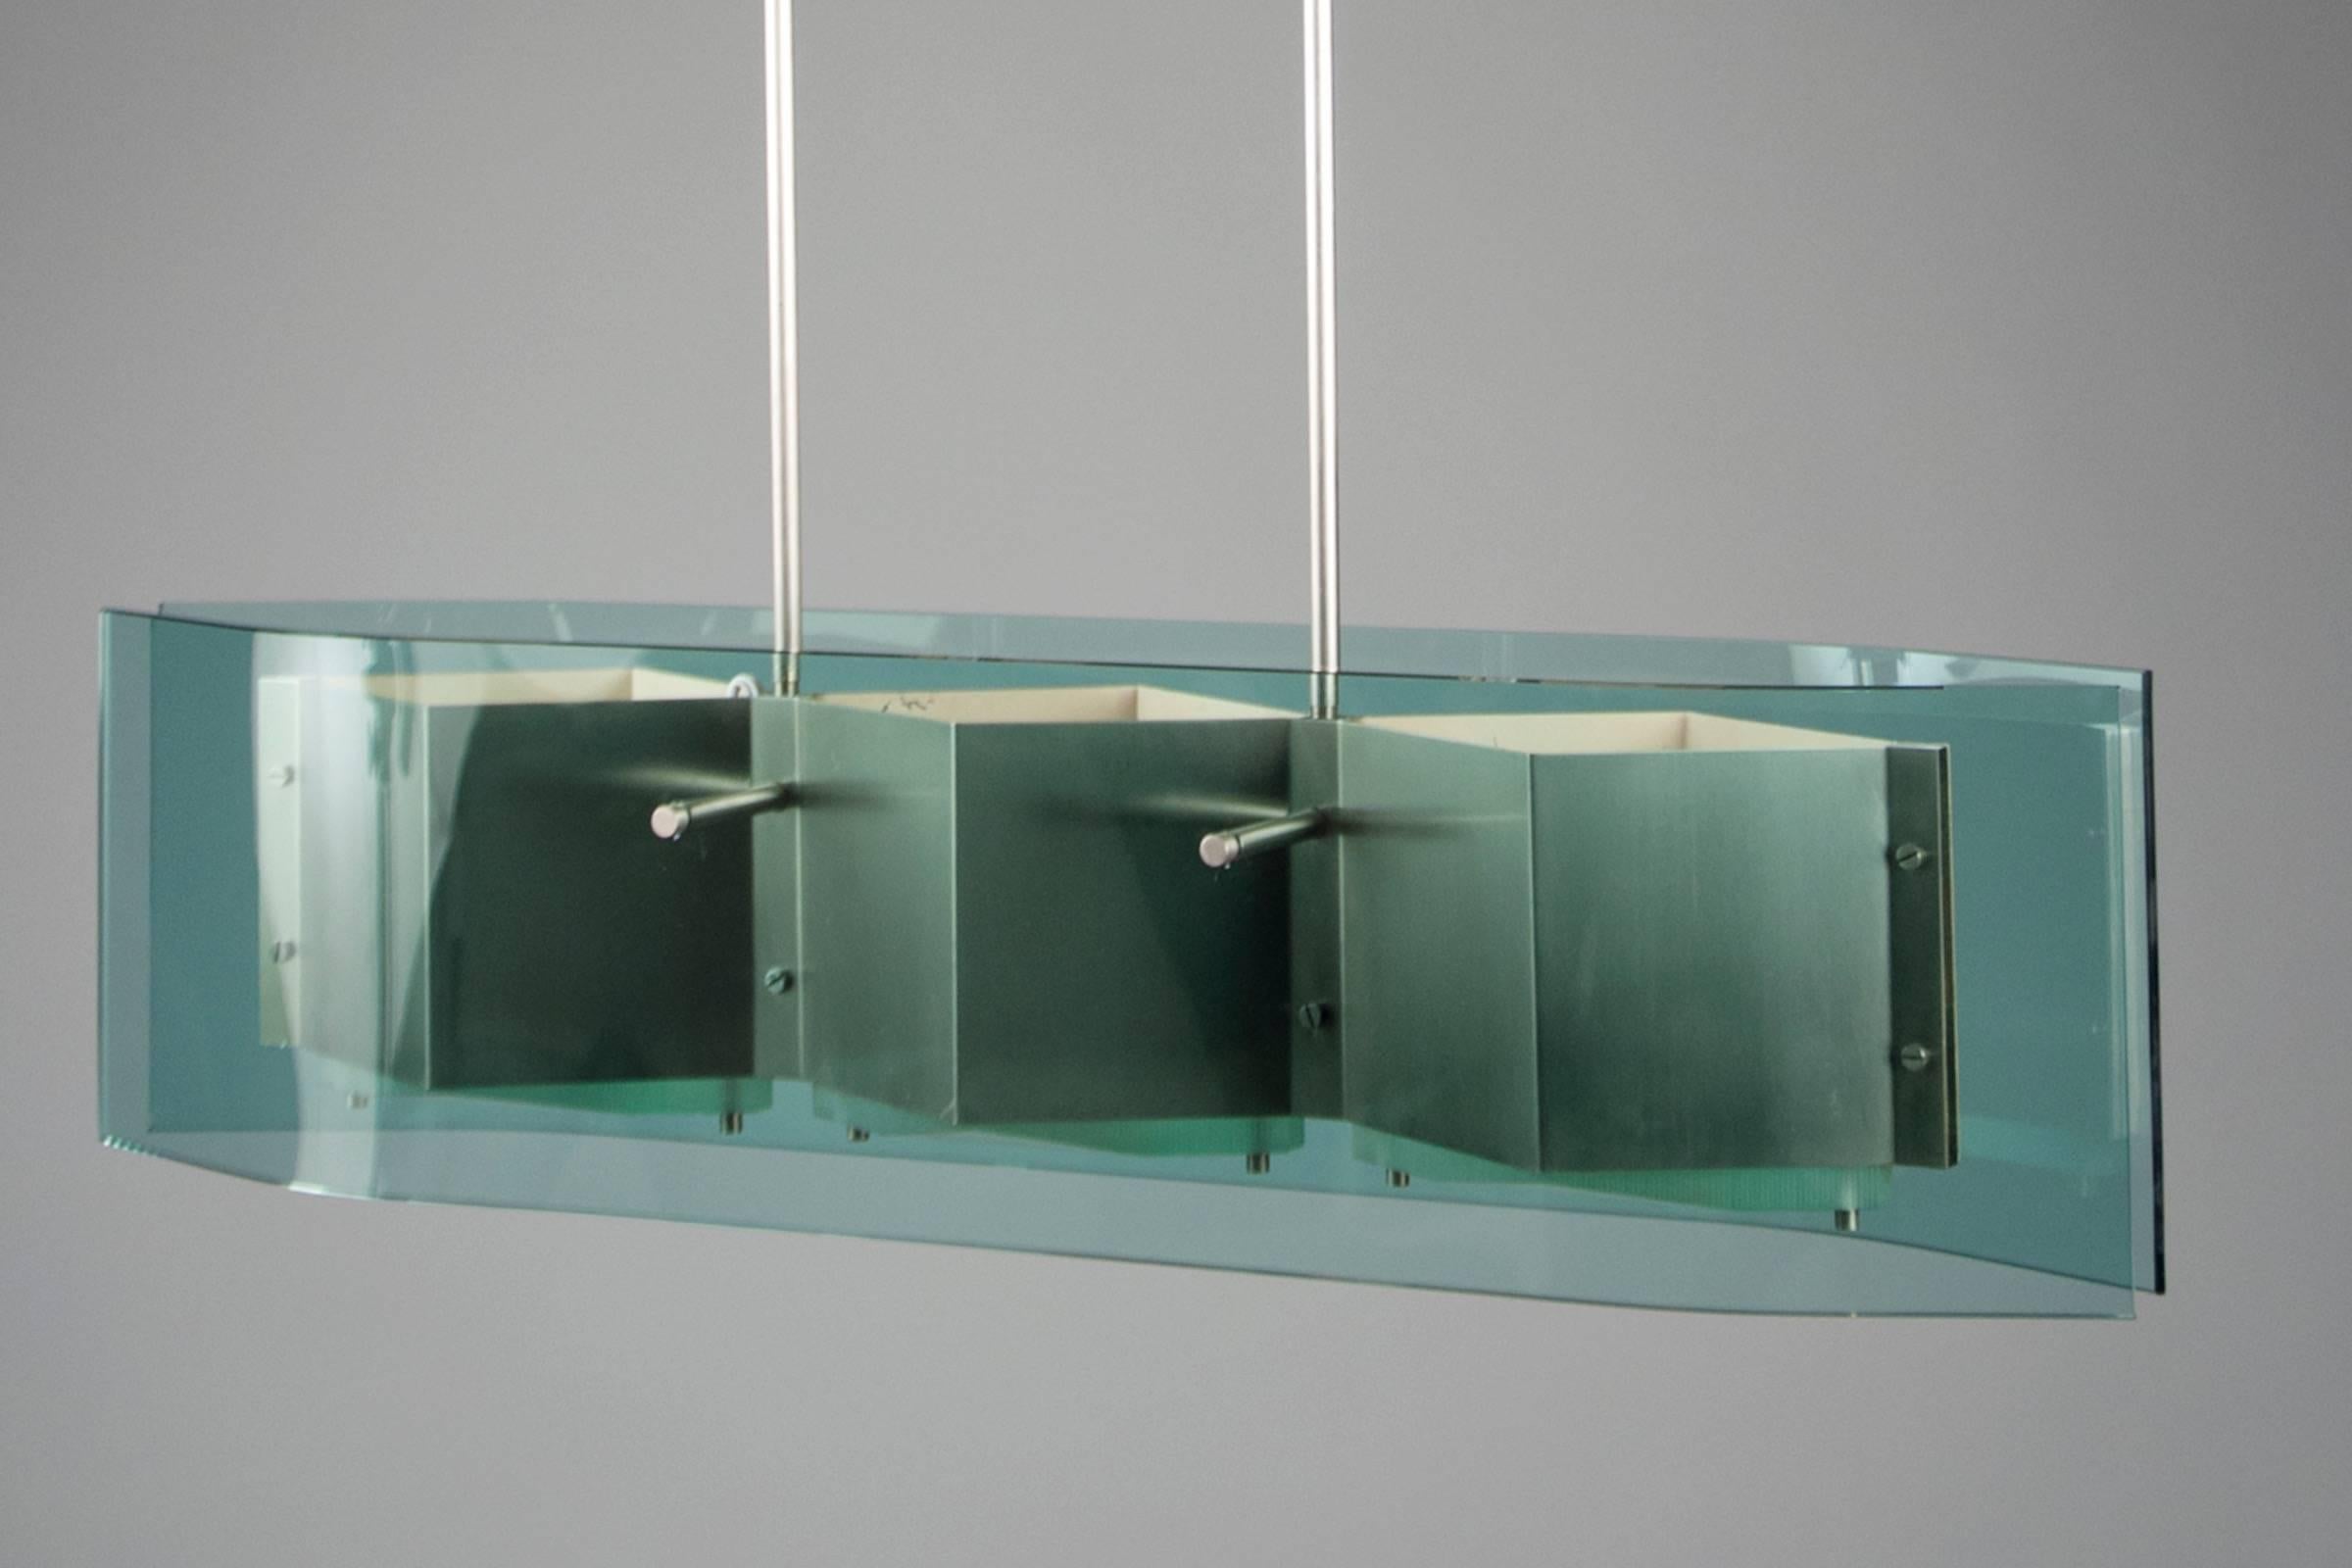 Two metal stems suspending two blue-green curved glass panels encompassing a three-part nickel structure.
   

